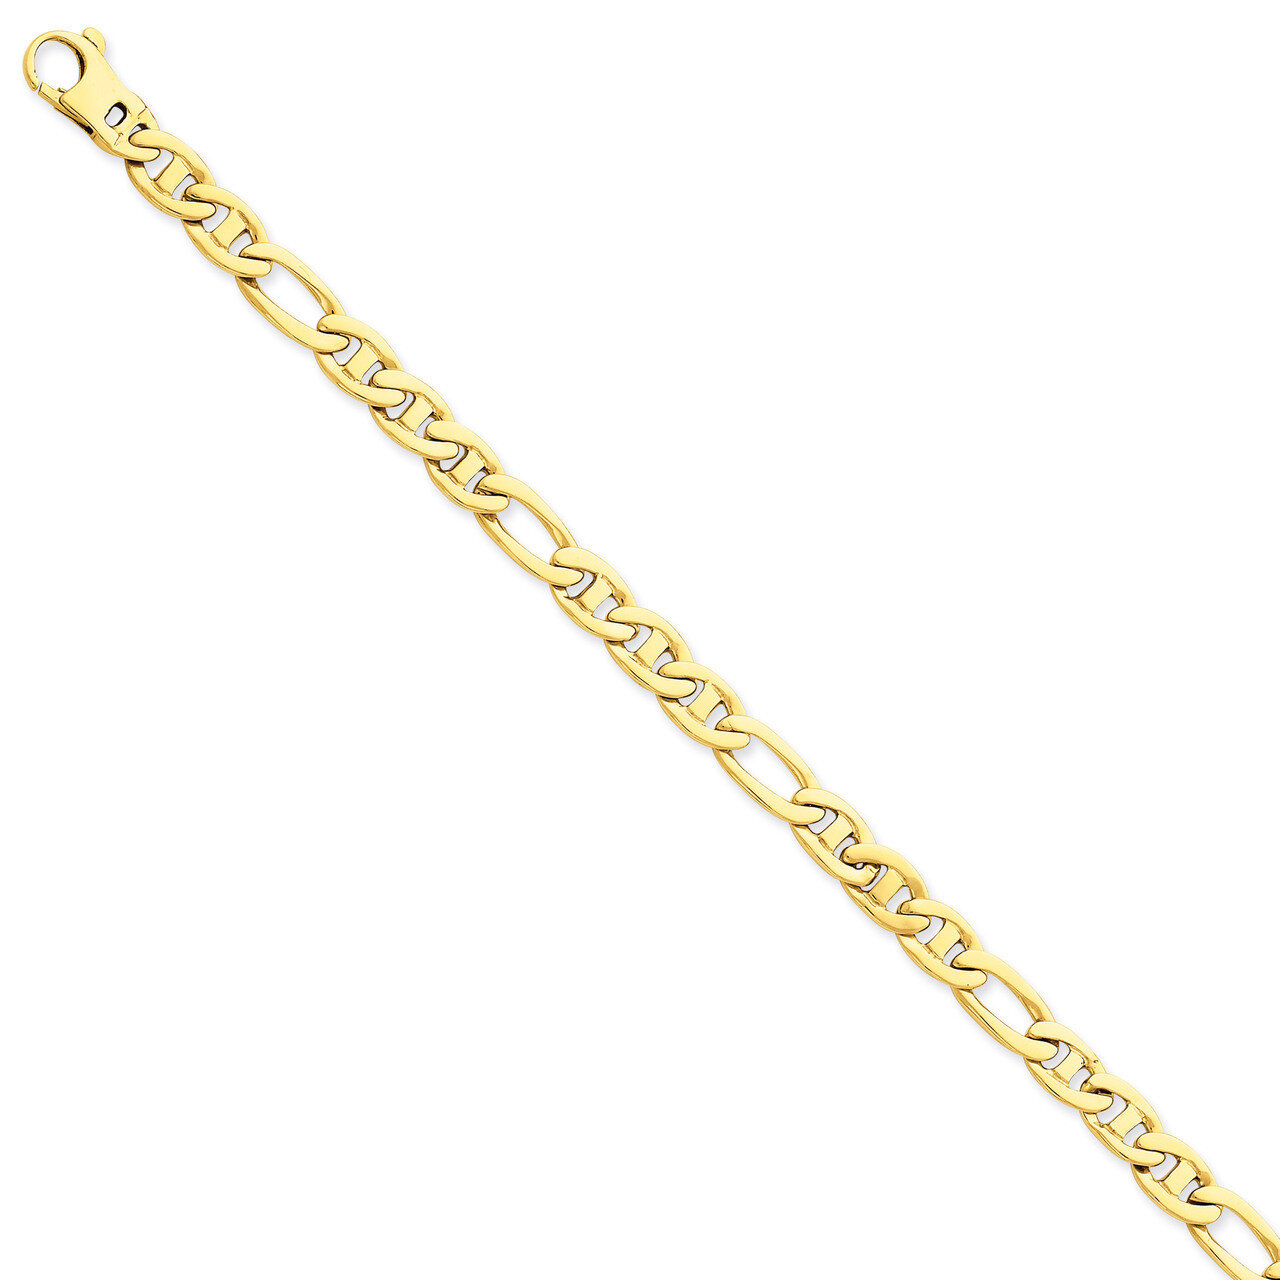 6.5mm Solid Hand-Polished 3 & 1 Flat Anchor Chain 18 Inch 14k Gold FL438-18